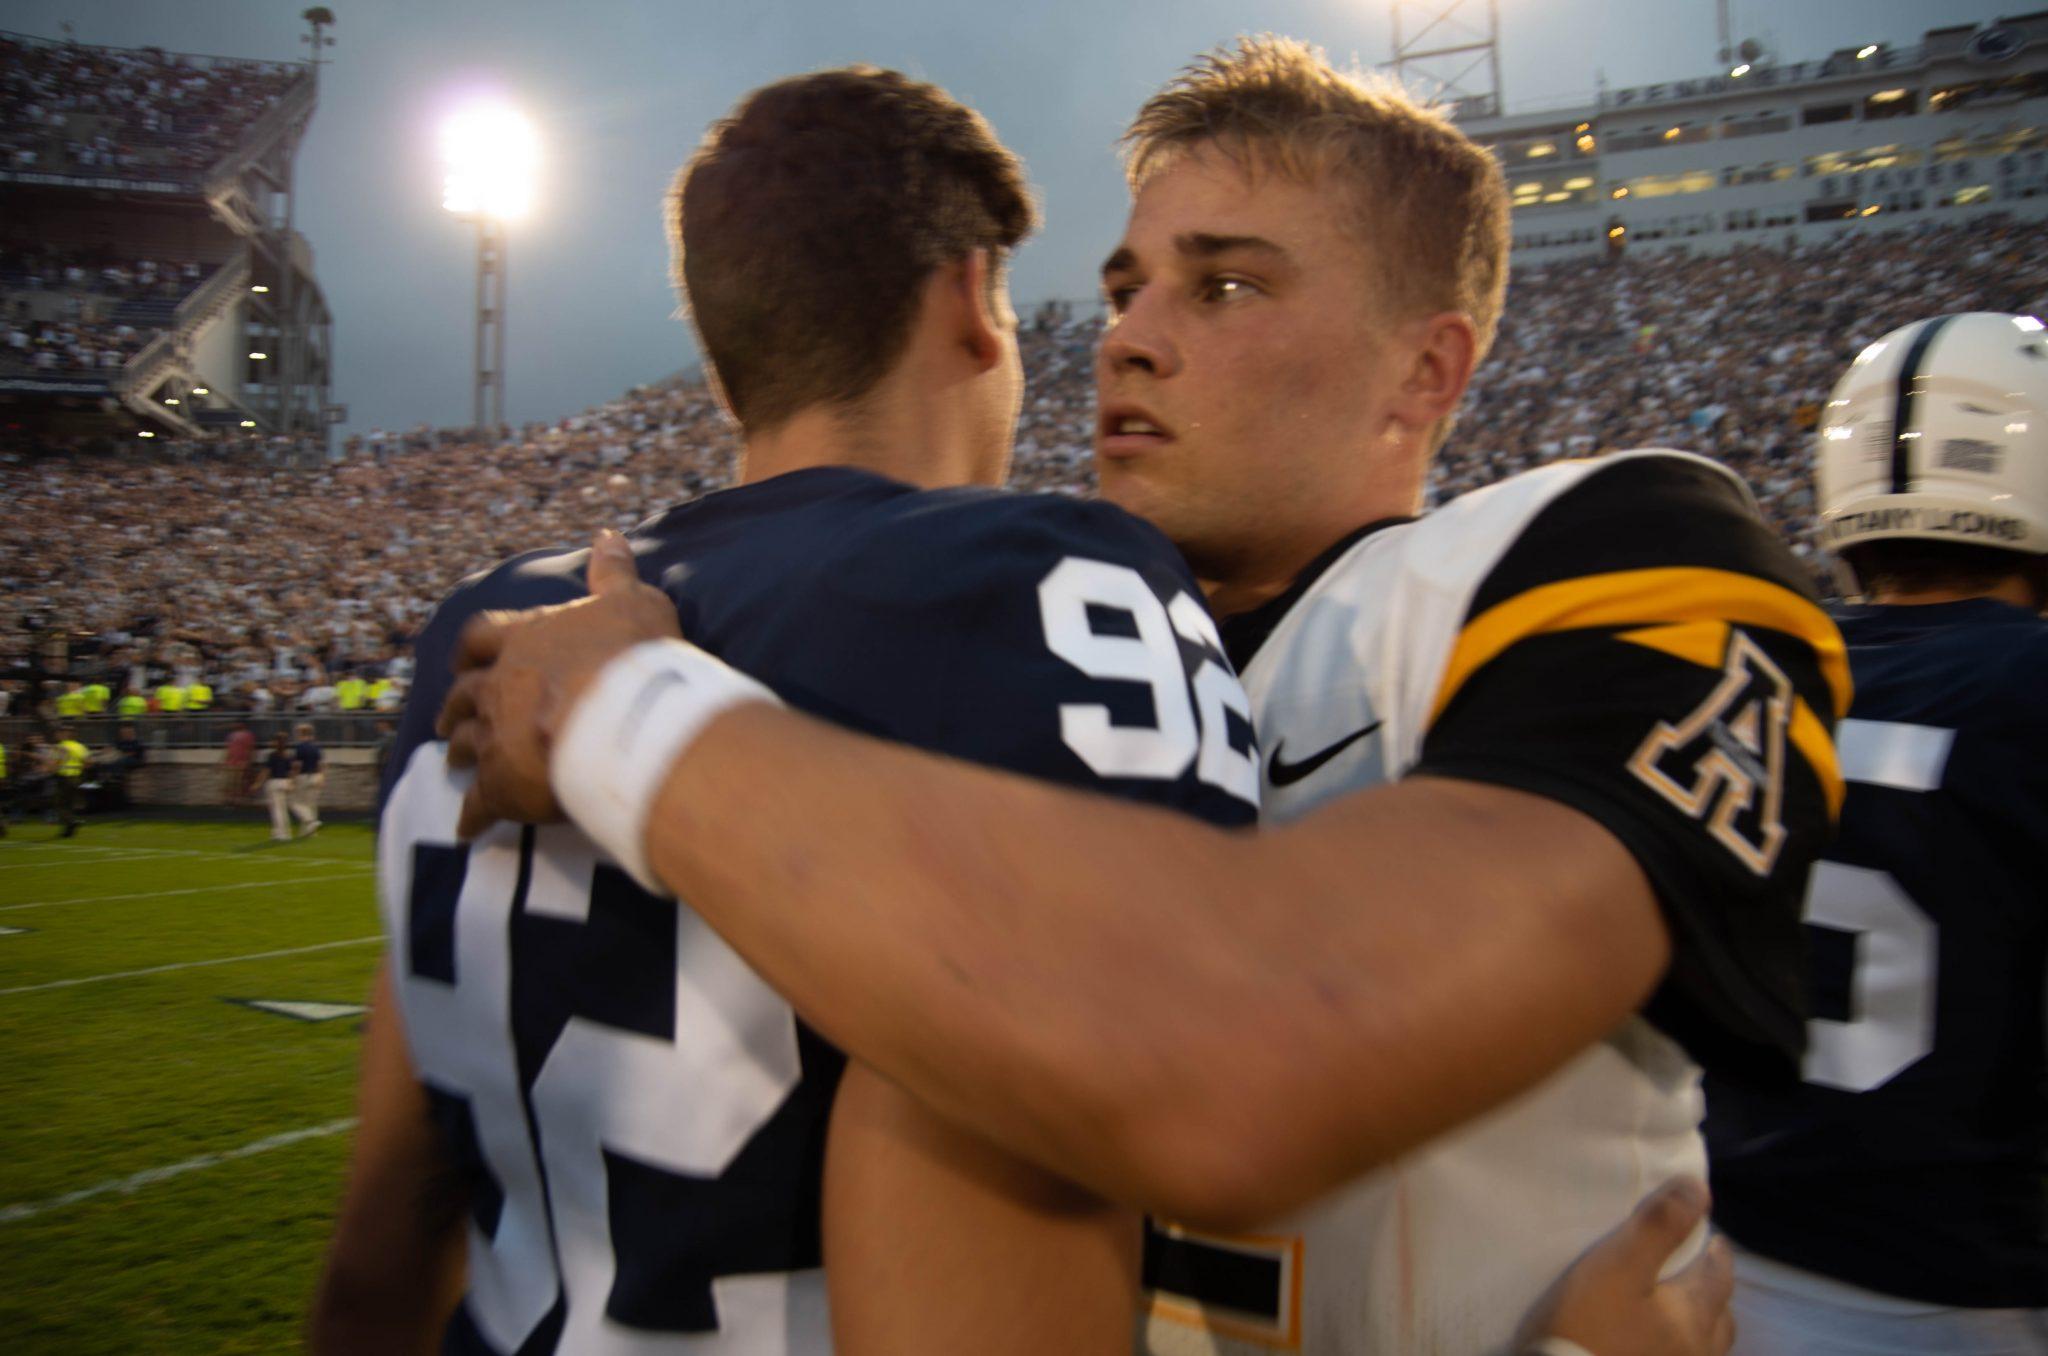 Redshirt sophomore quarterback Zac Thomas embraces a Penn State player following their loss to the Nittany Lions on Saturday.